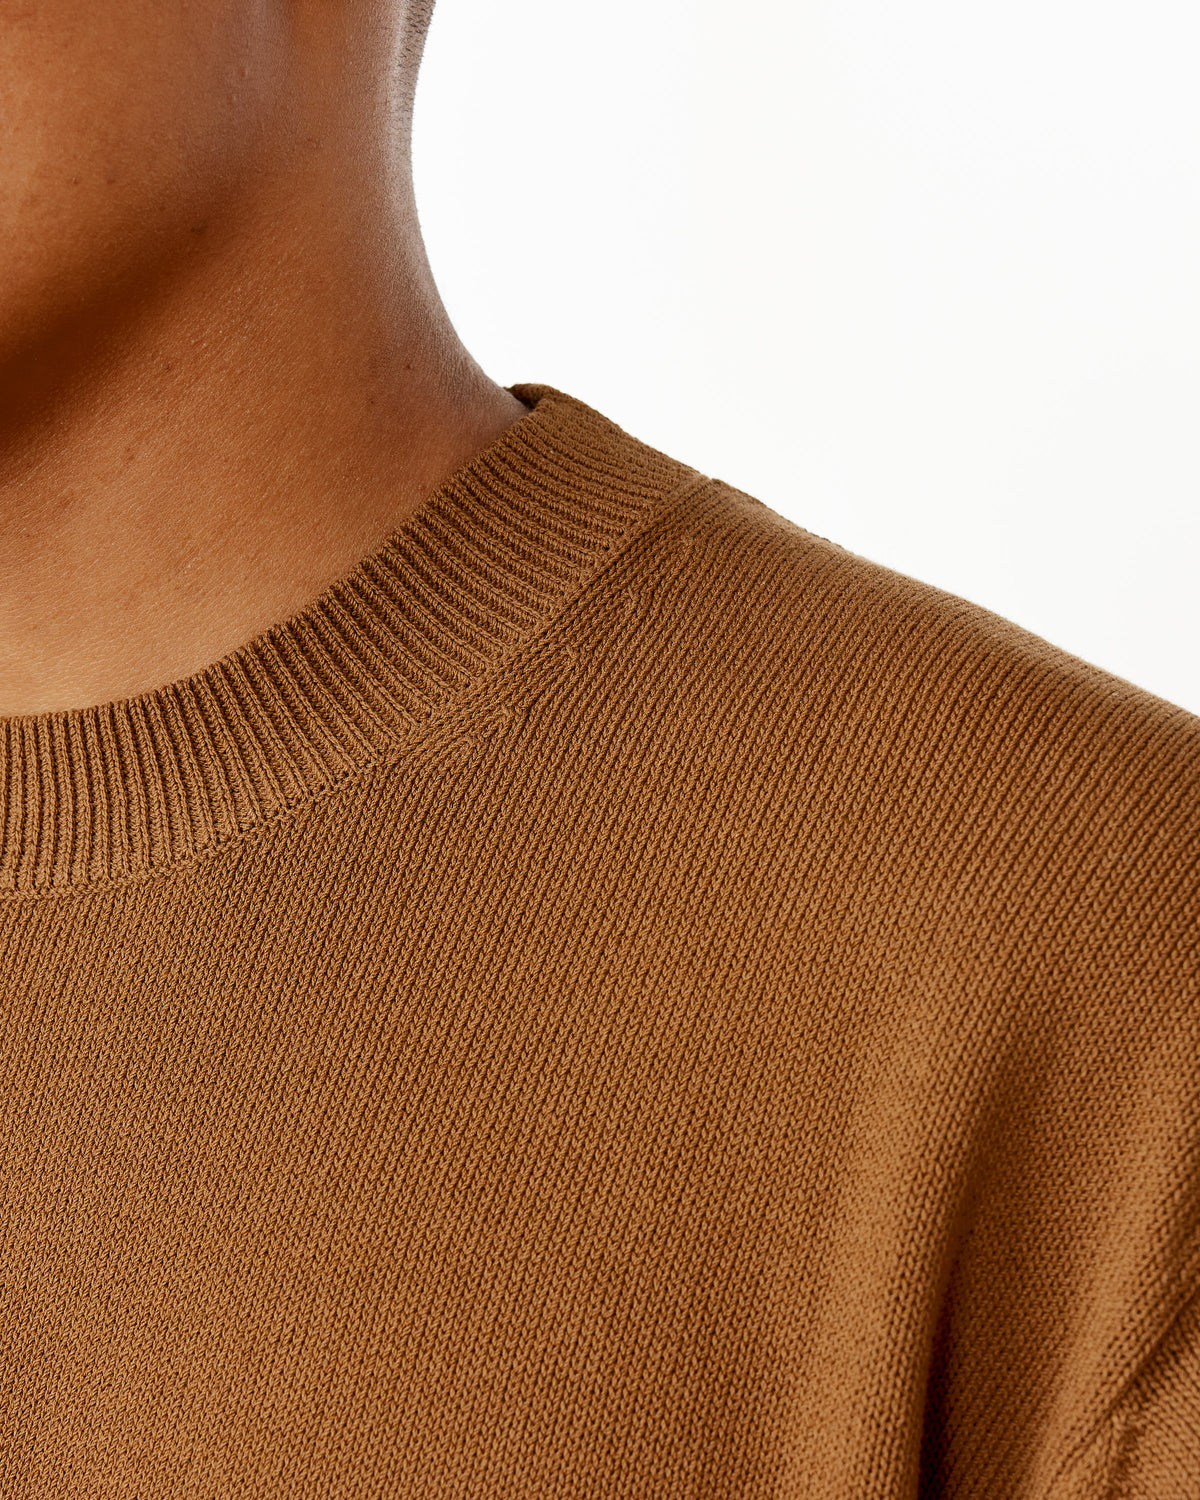 Explore our exciting line of 7GG Knit T-shirt Studio Nicholson